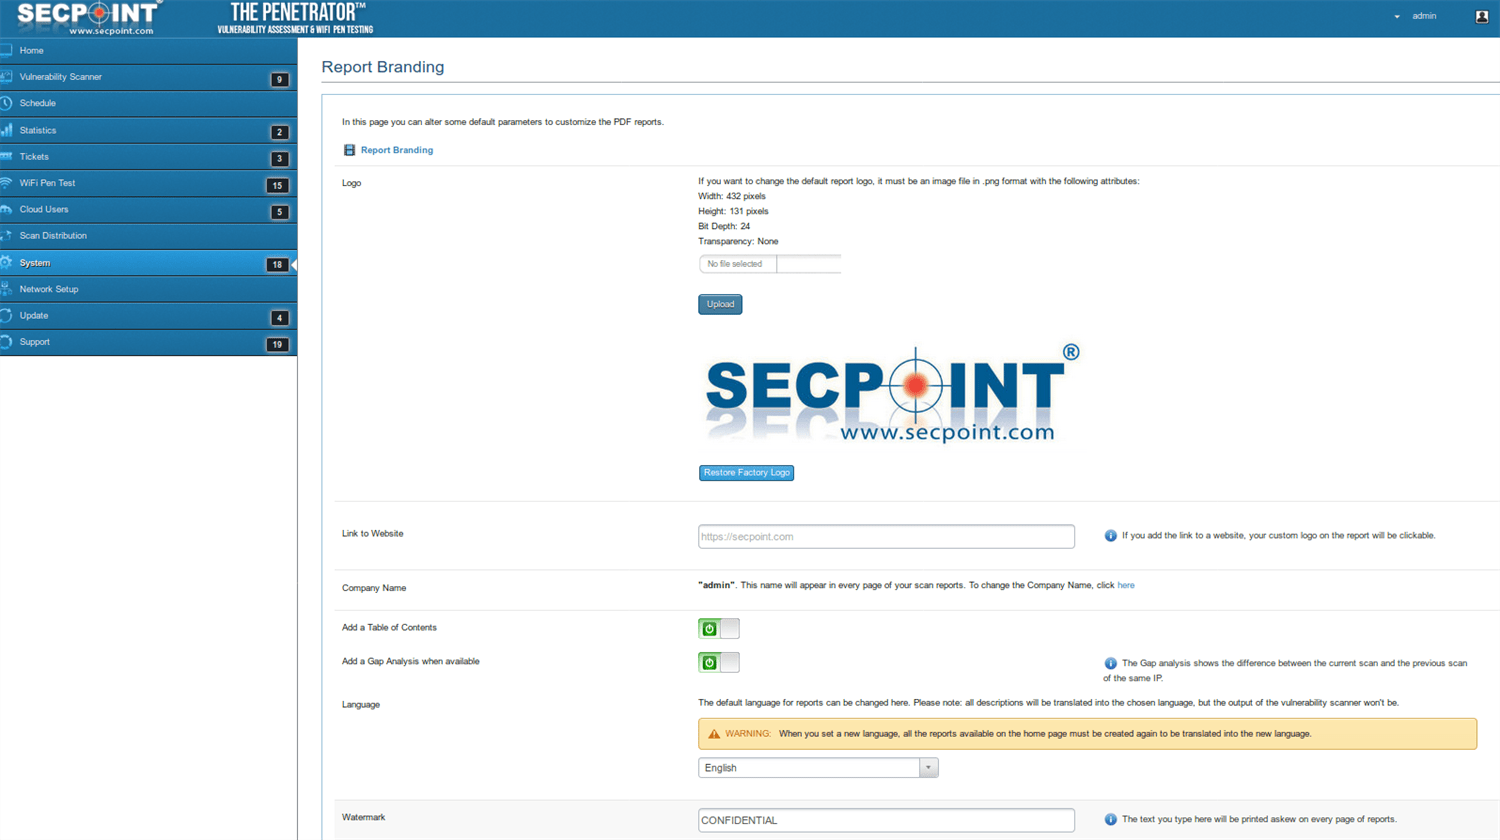 SecPoint Penetrator S9 - 128 IP Concurrent Scan License 1 Year Renewal - SecPoint